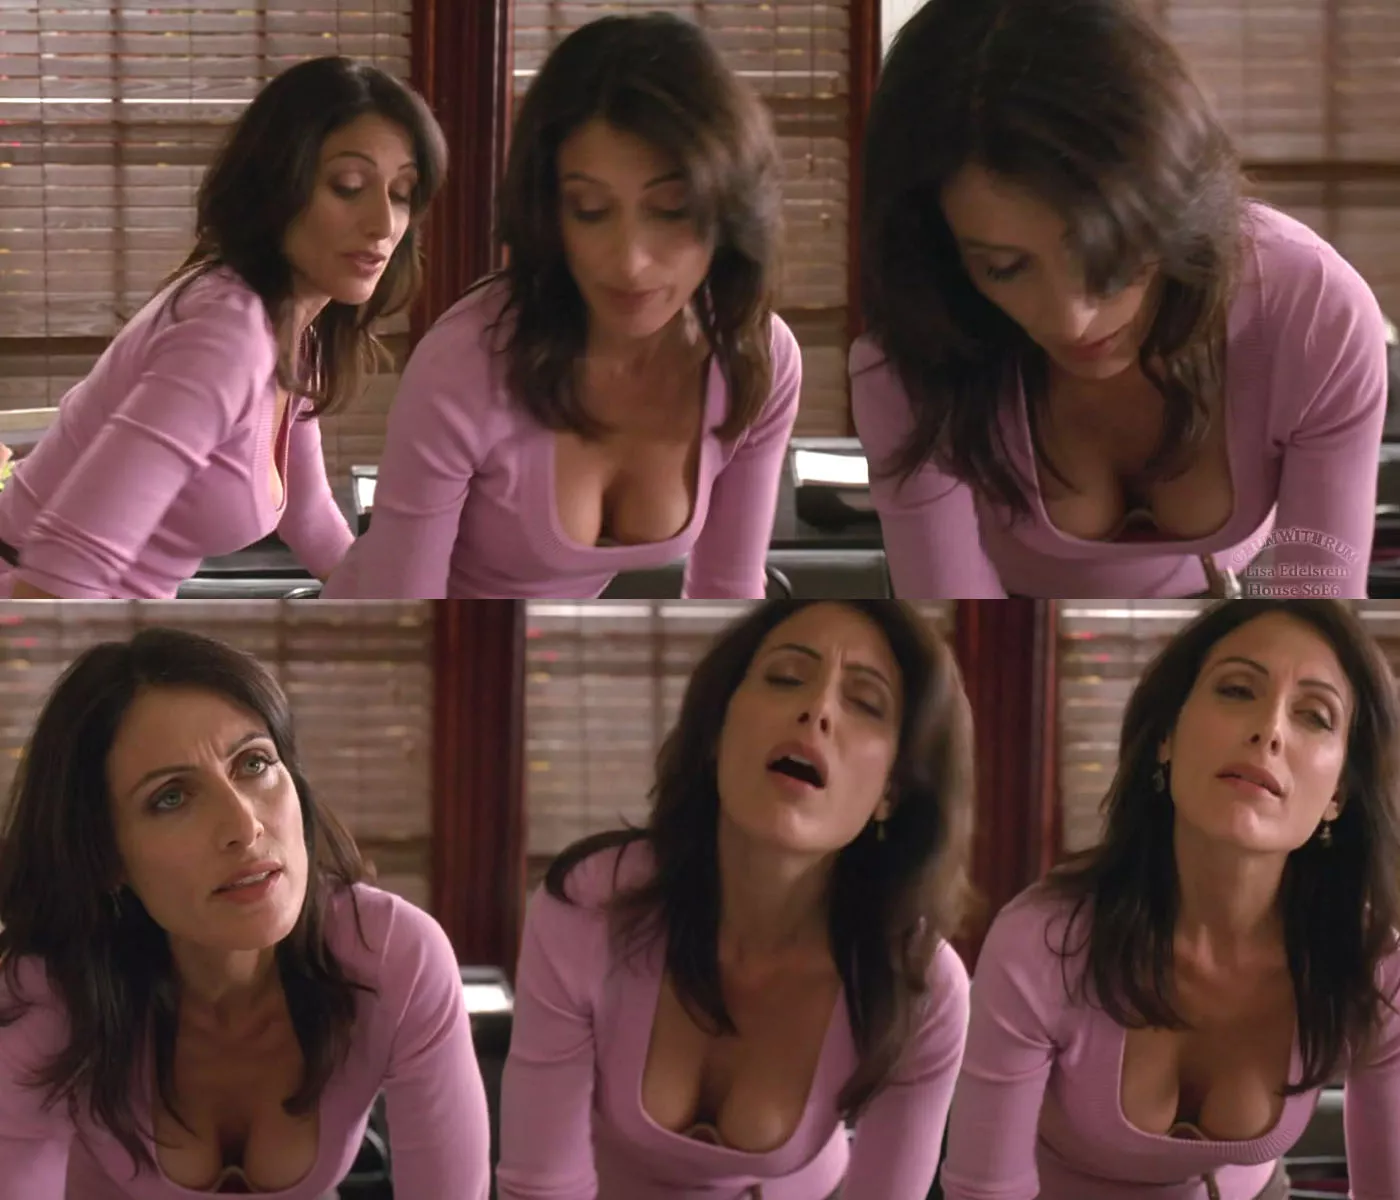 Lisa Edelstein Nude in Girlfriends' Guide to Divorce: S01 E13 Rule #101  (2015) Lisa Edelstein - Video Clip #01 at NitroVideo.com